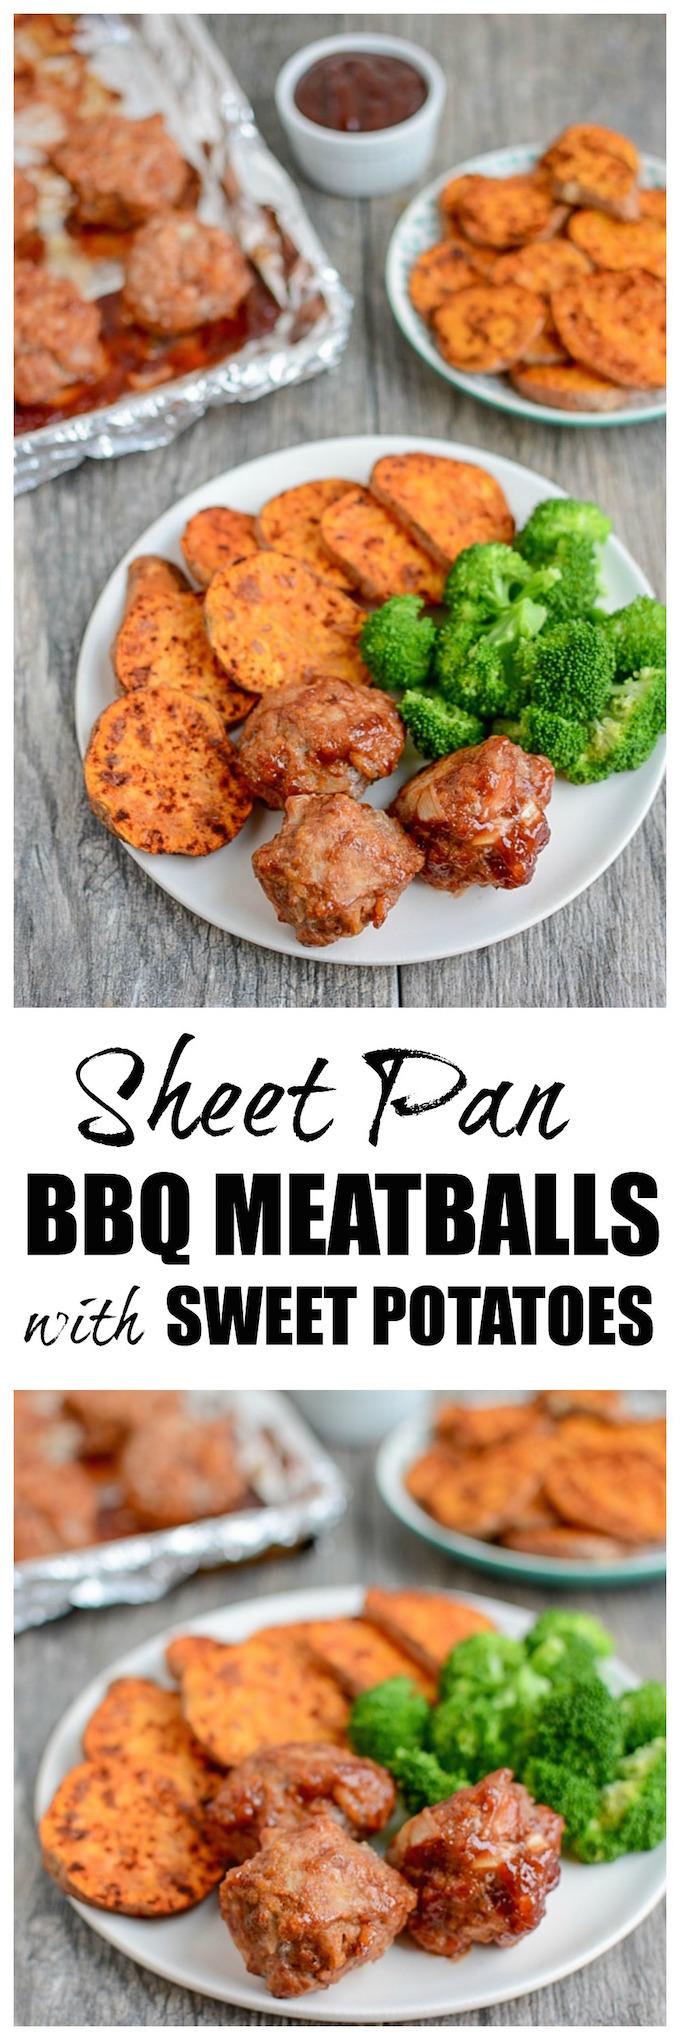 Make these Sheet Pan BBQ Meatballs with Sweet Potatoes recipe for a quick and easy weeknight dinner that the whole family will love! Plus the leftovers make the perfect healthy lunch option.